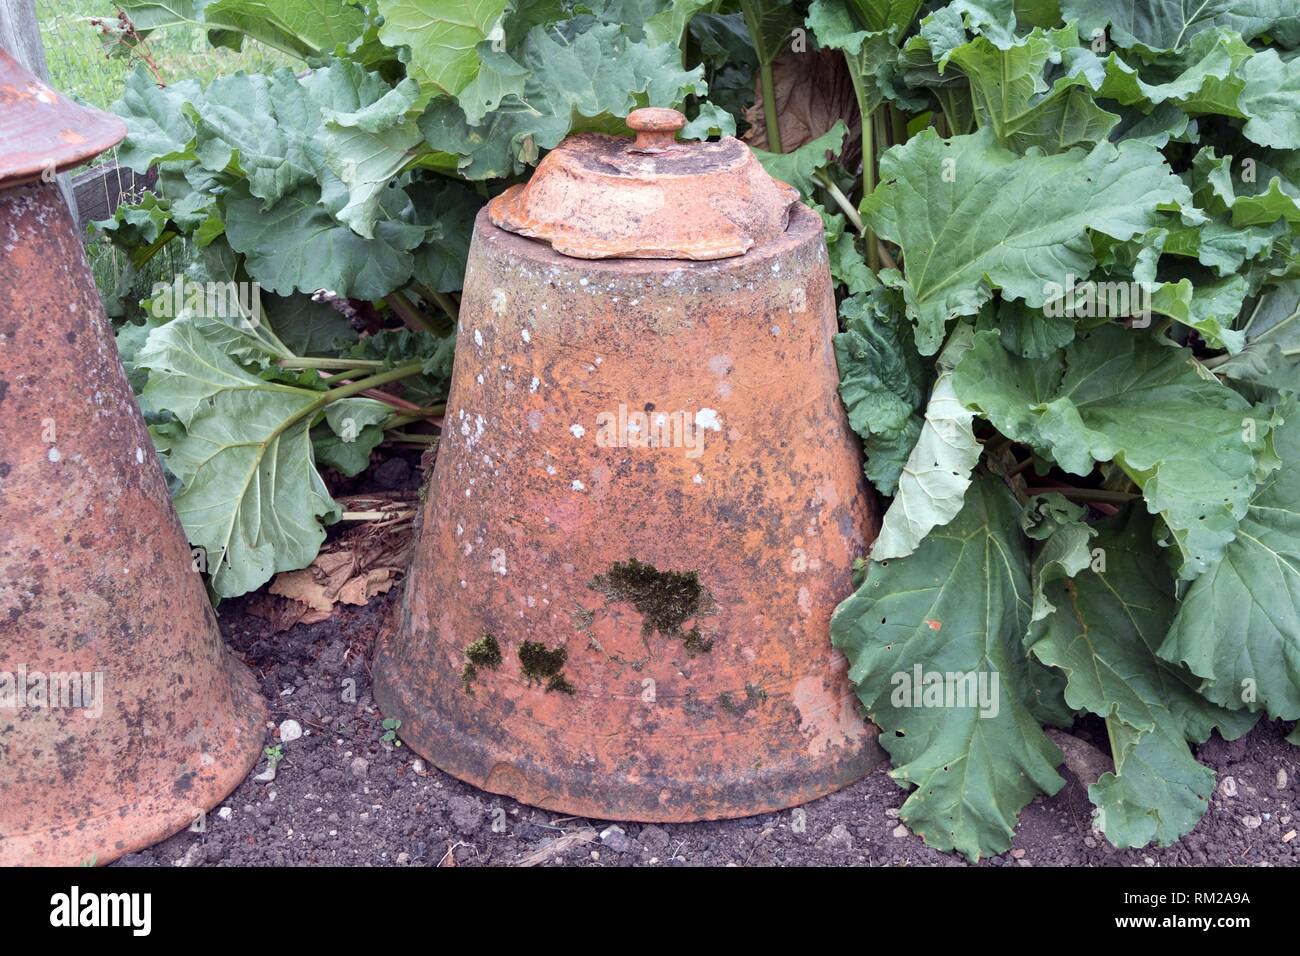 Old fashioned bell shaped rhubarb forcers and rhubarb leaves in a kitchen garden, Frampton on Severn, the Cotswolds, England. Stock Photo